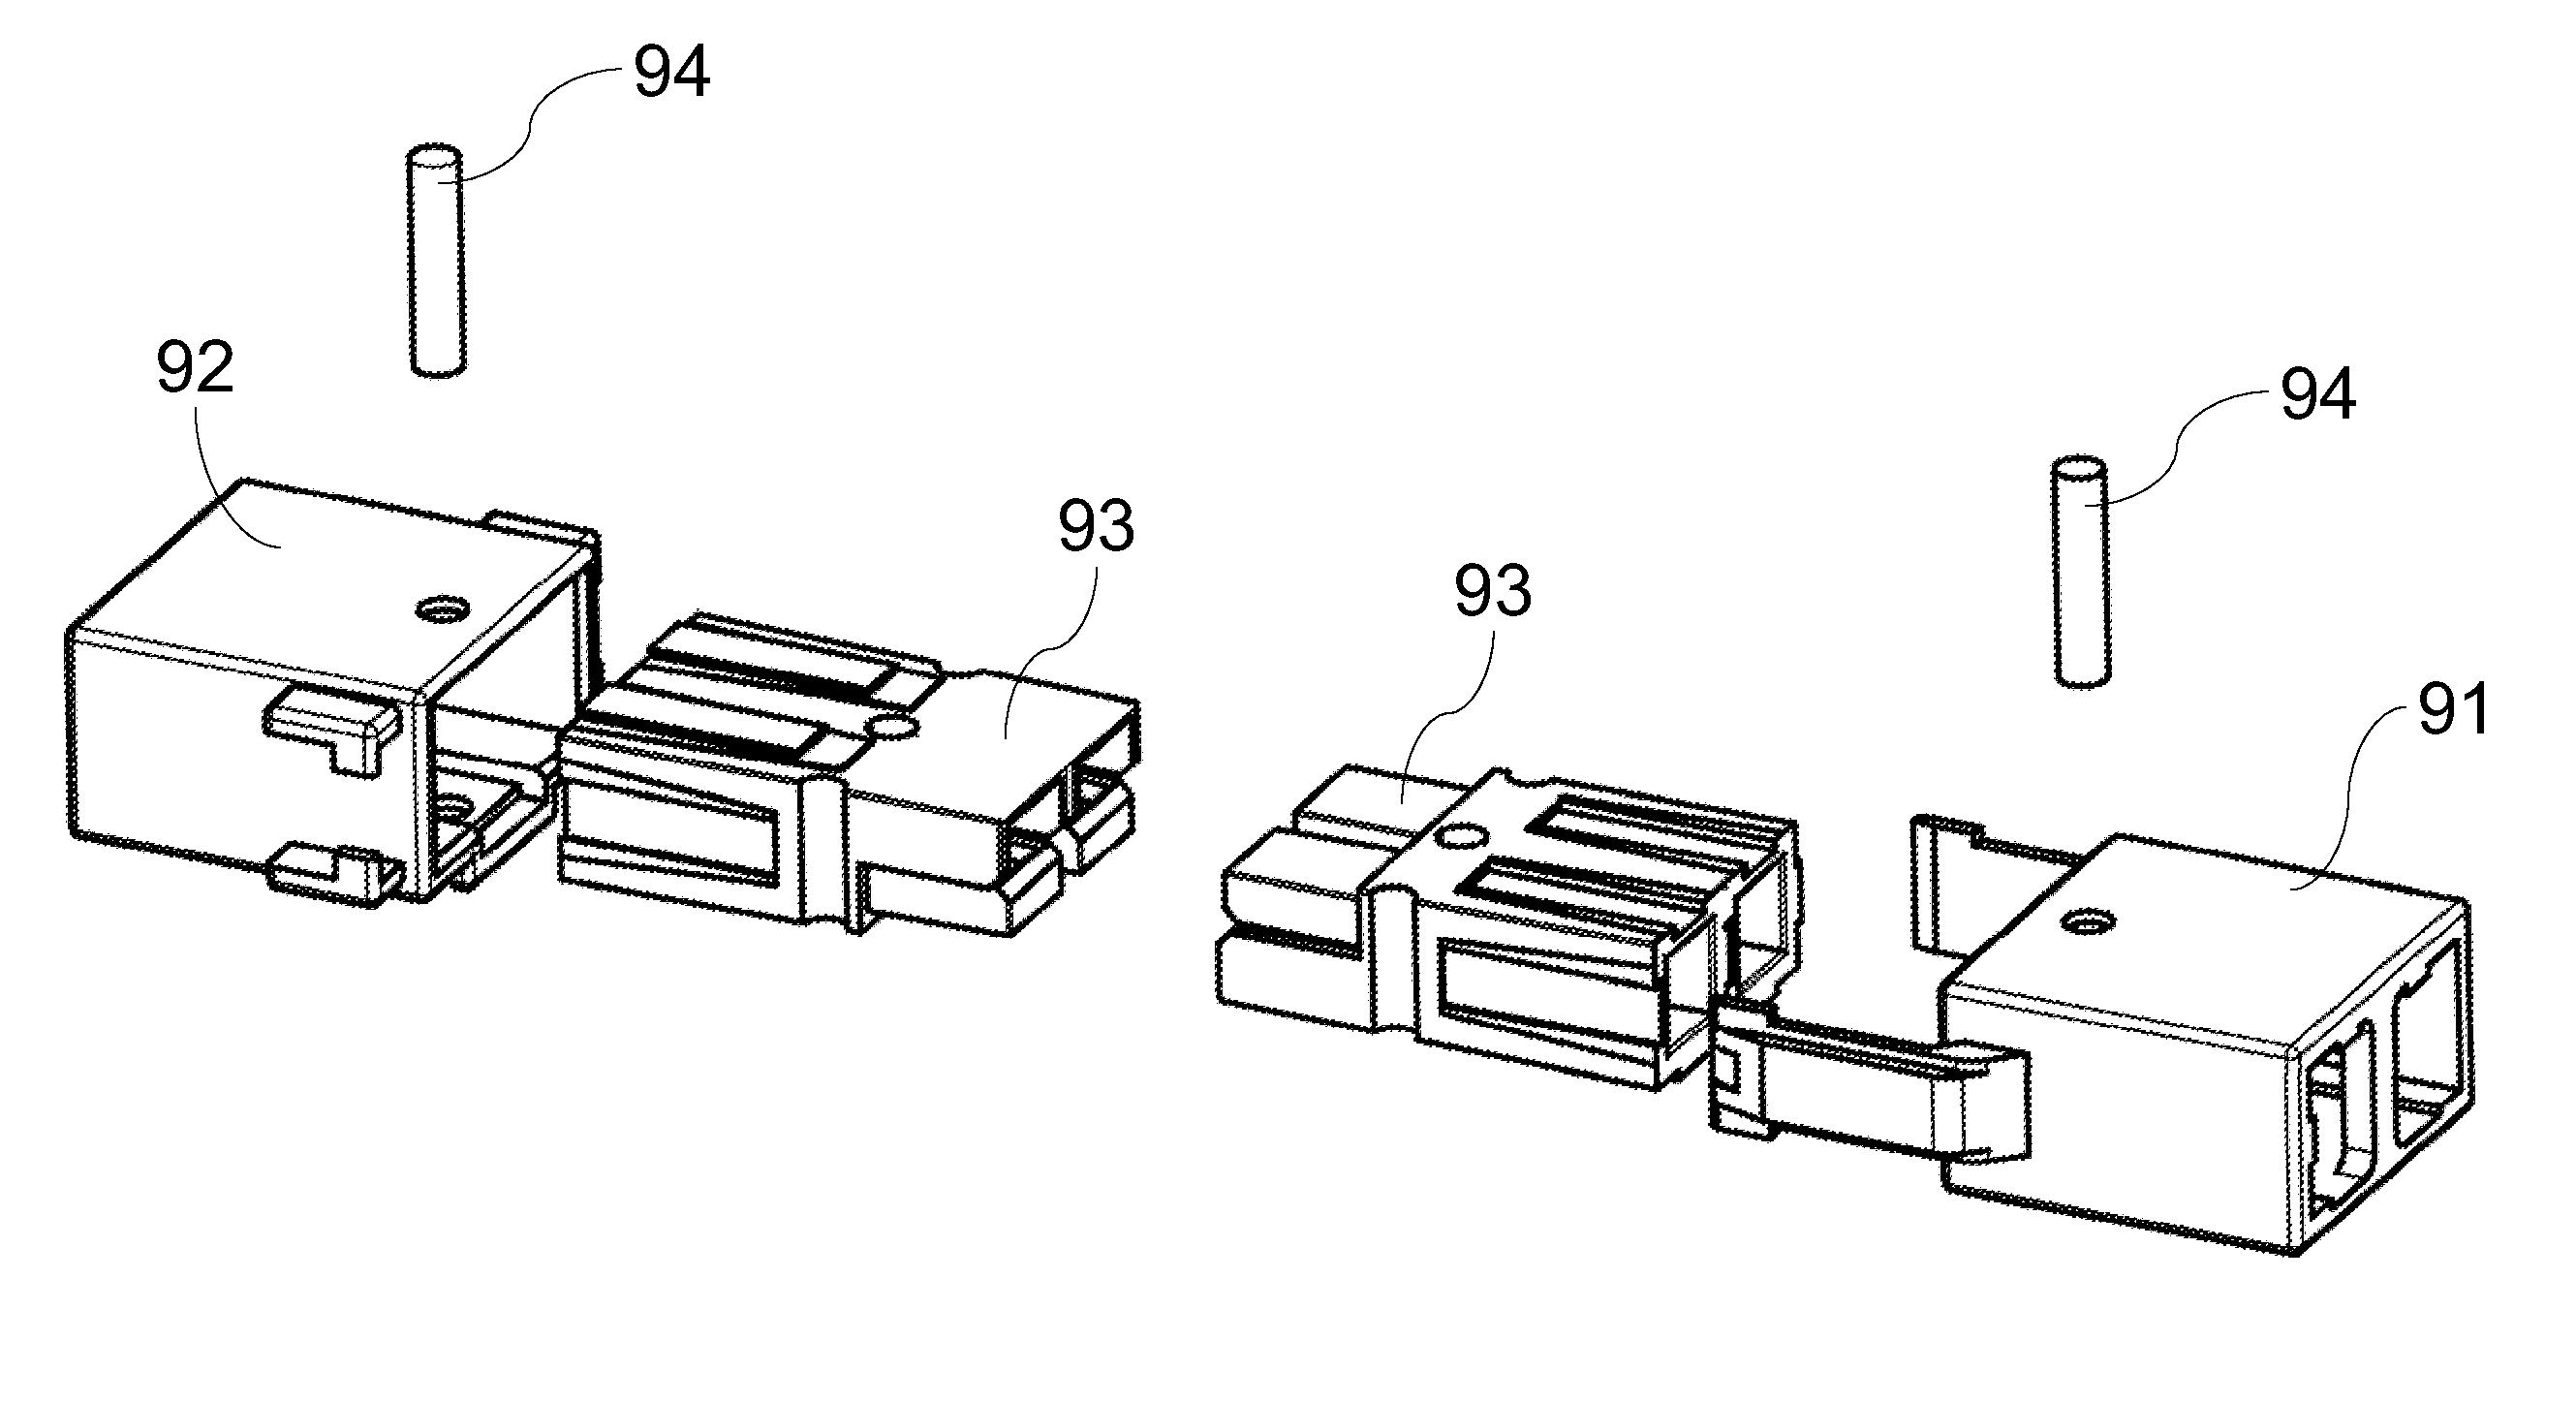 Latched connector assembly